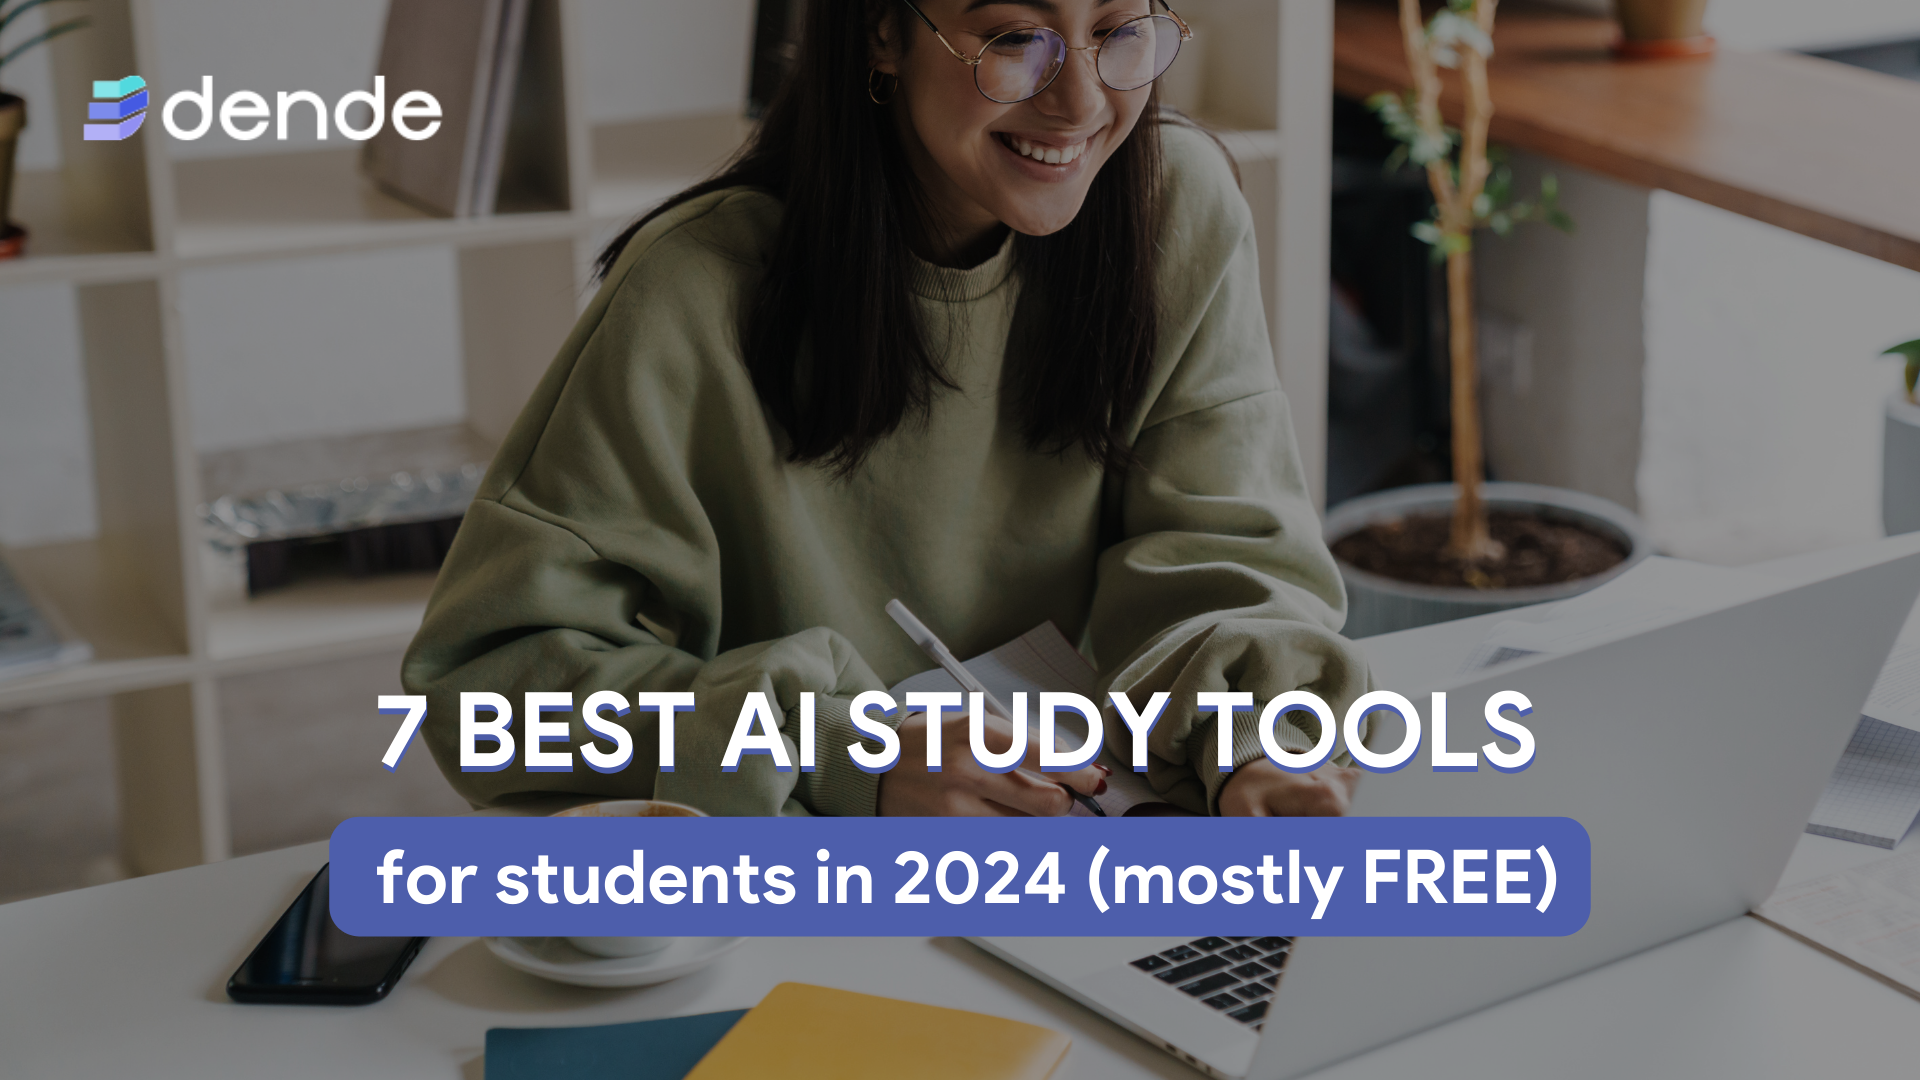 7 best AI study tools for students in 2024 (mostly FREE)